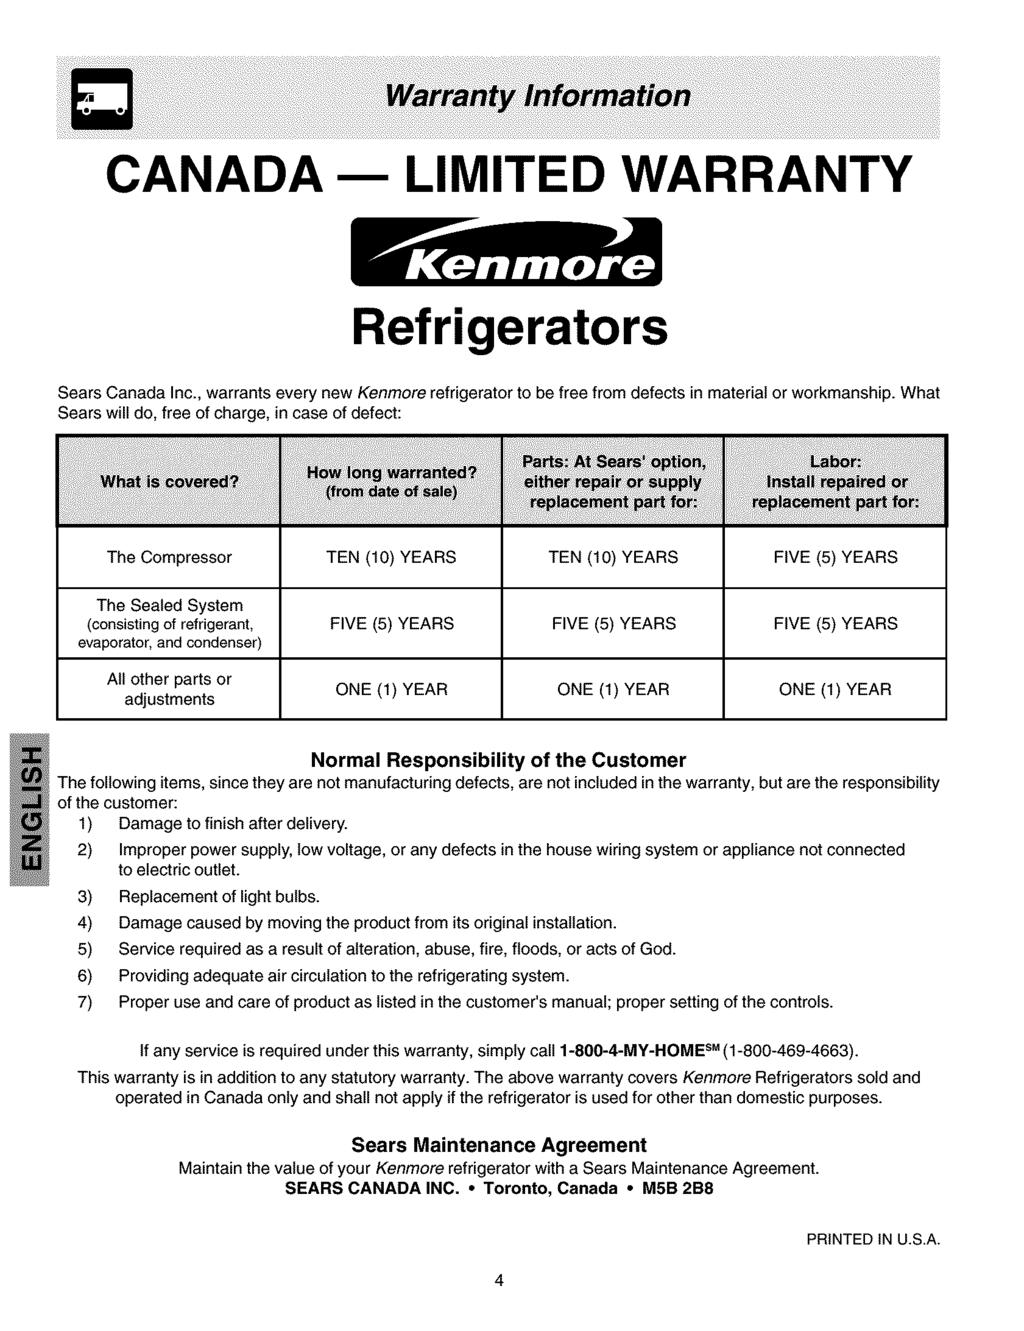 CANADA m LIMITED WARRANTY Refrigerators Sears Canada Inc., warrants every new Kenmore refrigerator to be free from defects in material or workmanship.